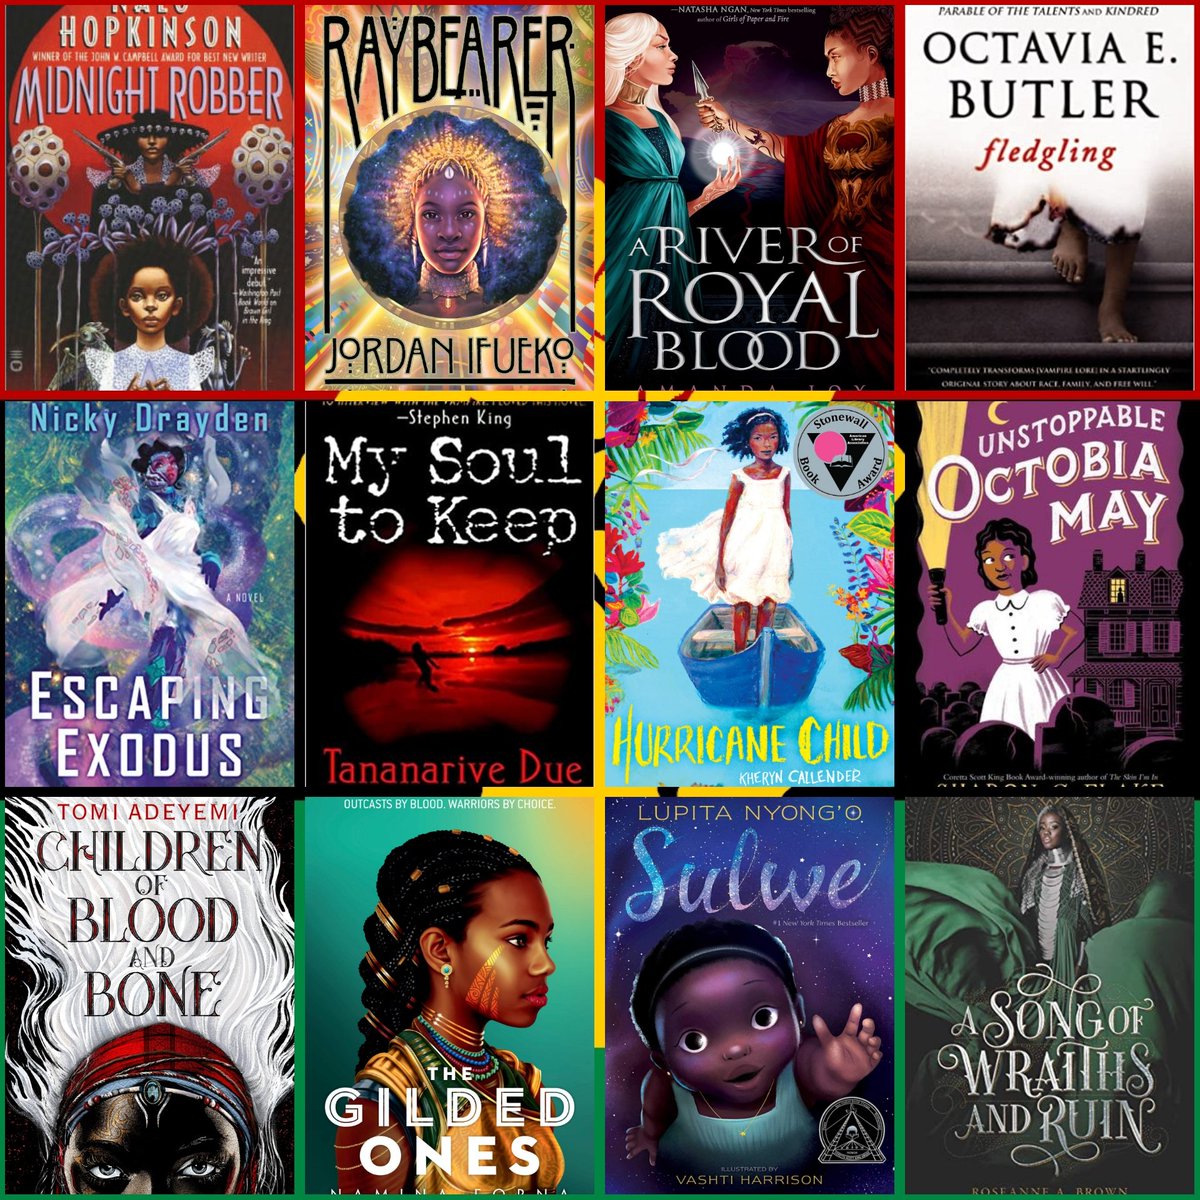 Hurricane Child - Kacen CallenderThe Unstoppable Octobia May - Sharon G. FlakeChildren of Blood & Bone - Tomi AdeyemiThe Gilded Ones - Namina FornaSulwe - Lupita Nyong’oA Song of Wraiths & Ruin - Roseanne A. Brown13/